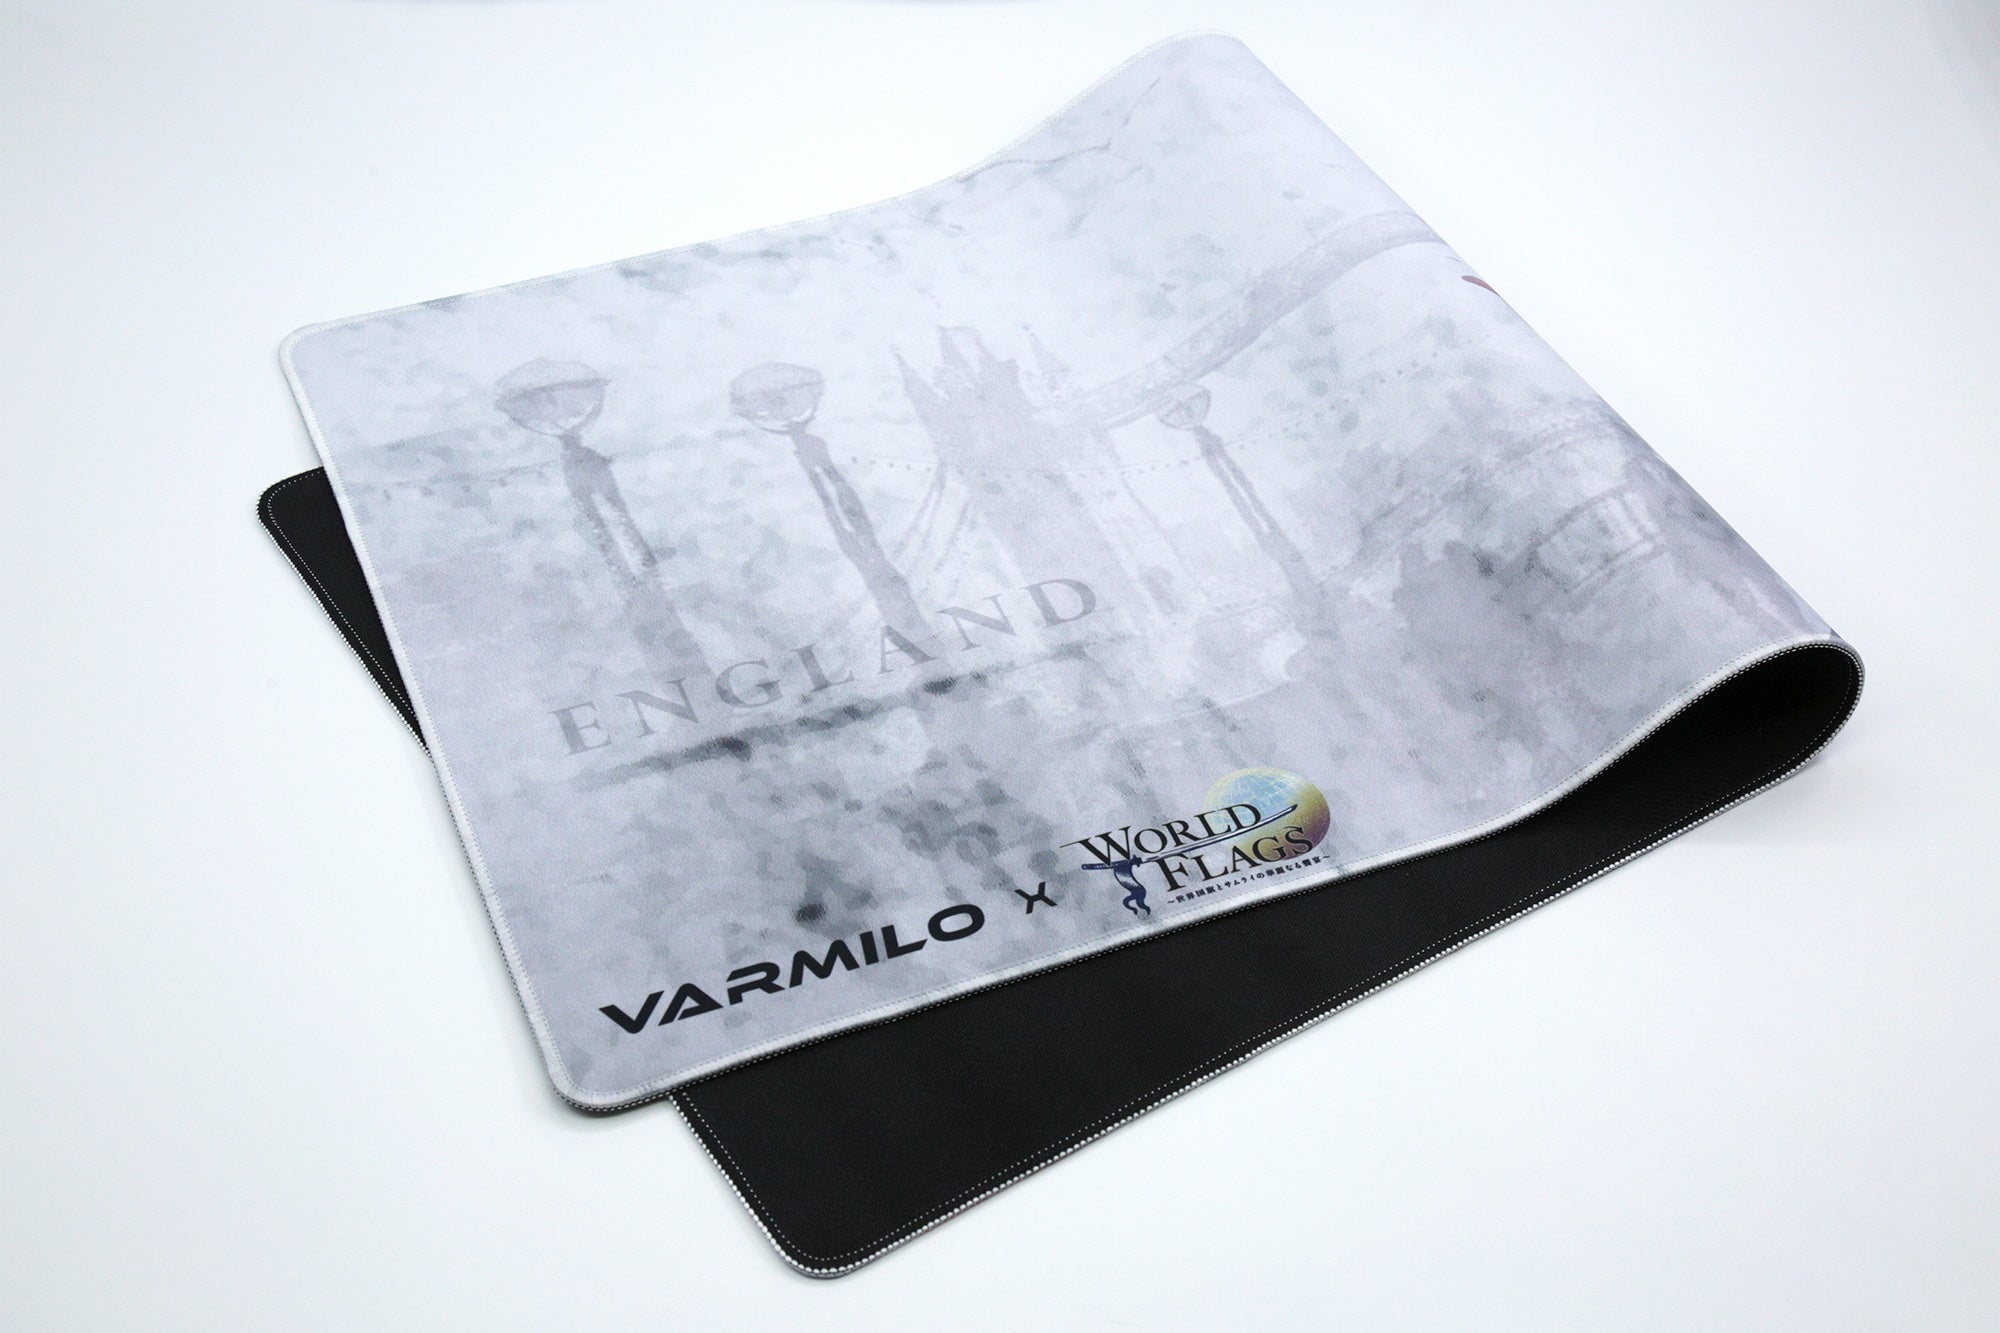 Varmilo Extra Large Olympics England Desk Mat with Stitched Edges MK1A0CRD78 |33433|